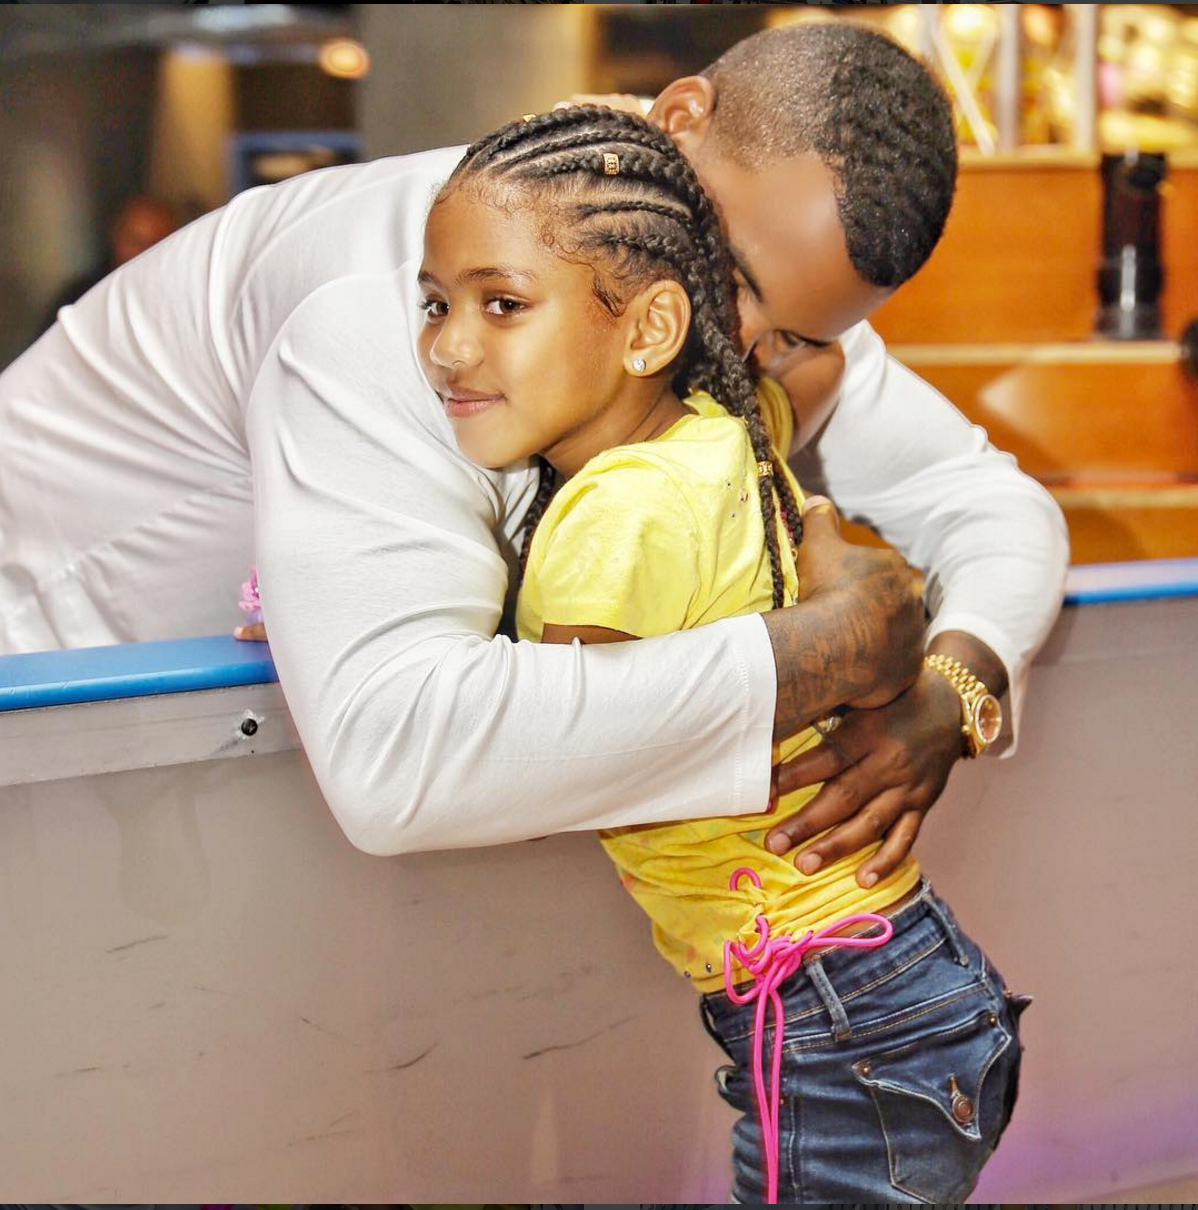 The Game Shares Sweet Message to Daughter Cali on Her Sixth Birthday
